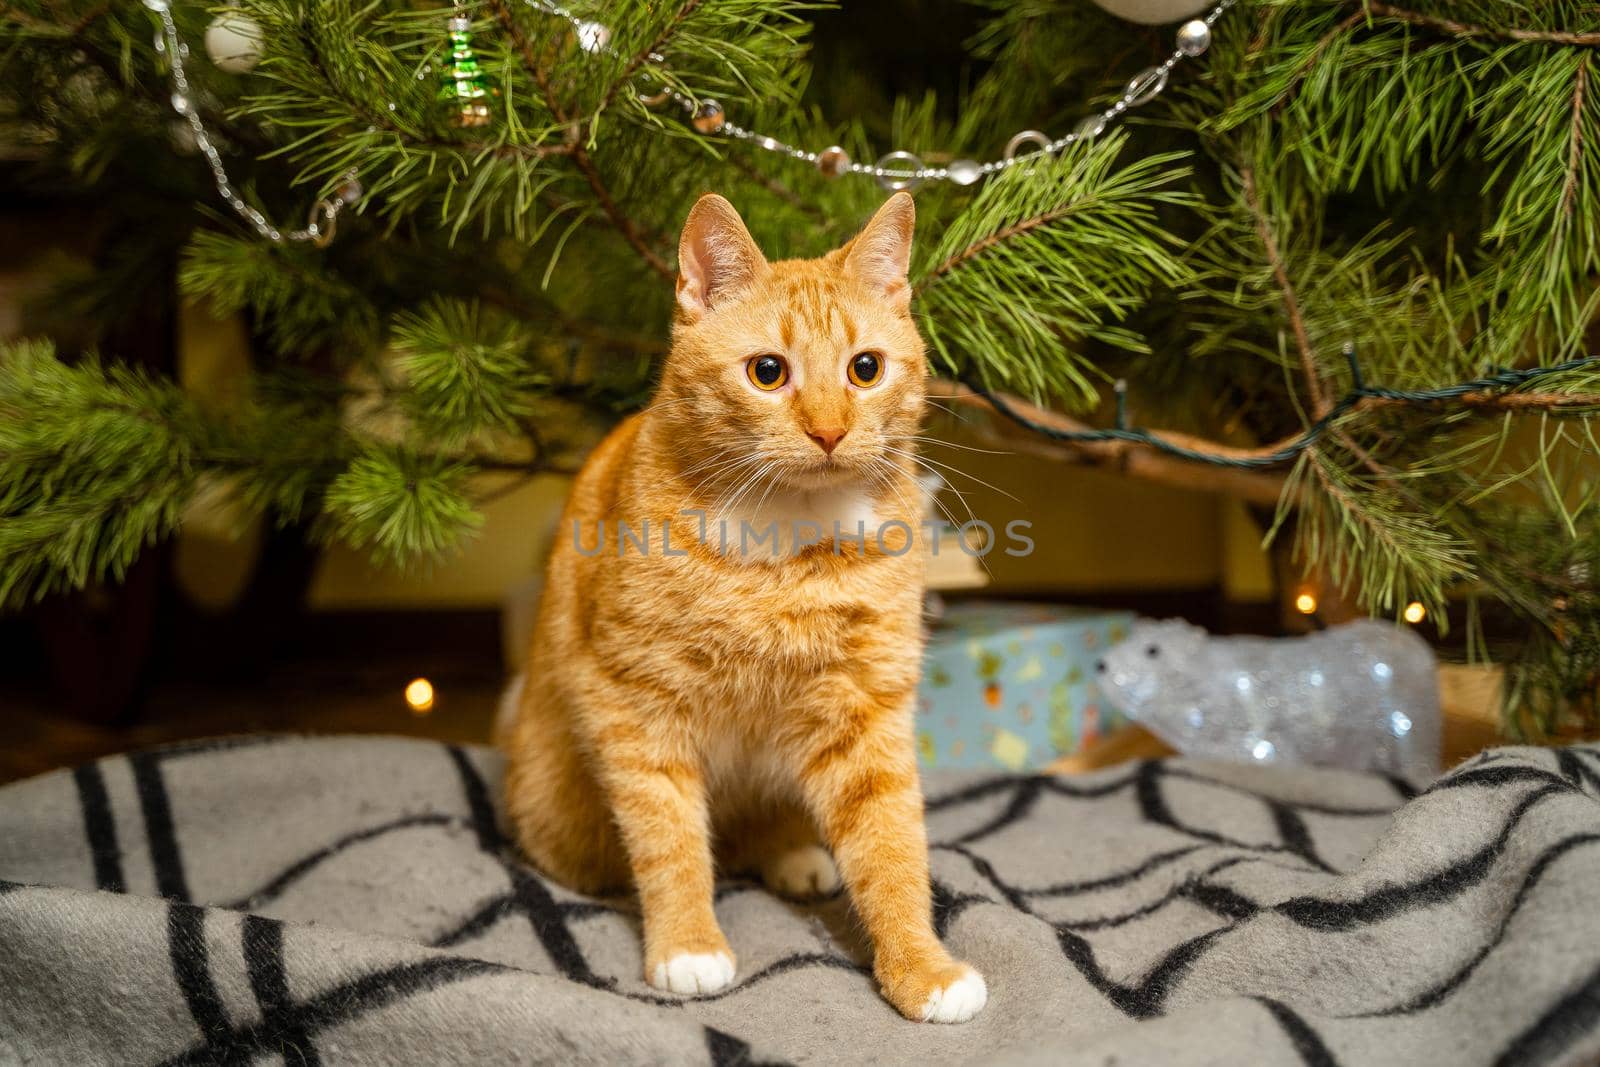 Happy Ginger cat sits on plaid under Christmas tree with festive decorations on New Year's Eve. A pet enjoys under pine tree at home on bedspread in the evening. Seasonal Christmas coziness with cat by Tomashevska